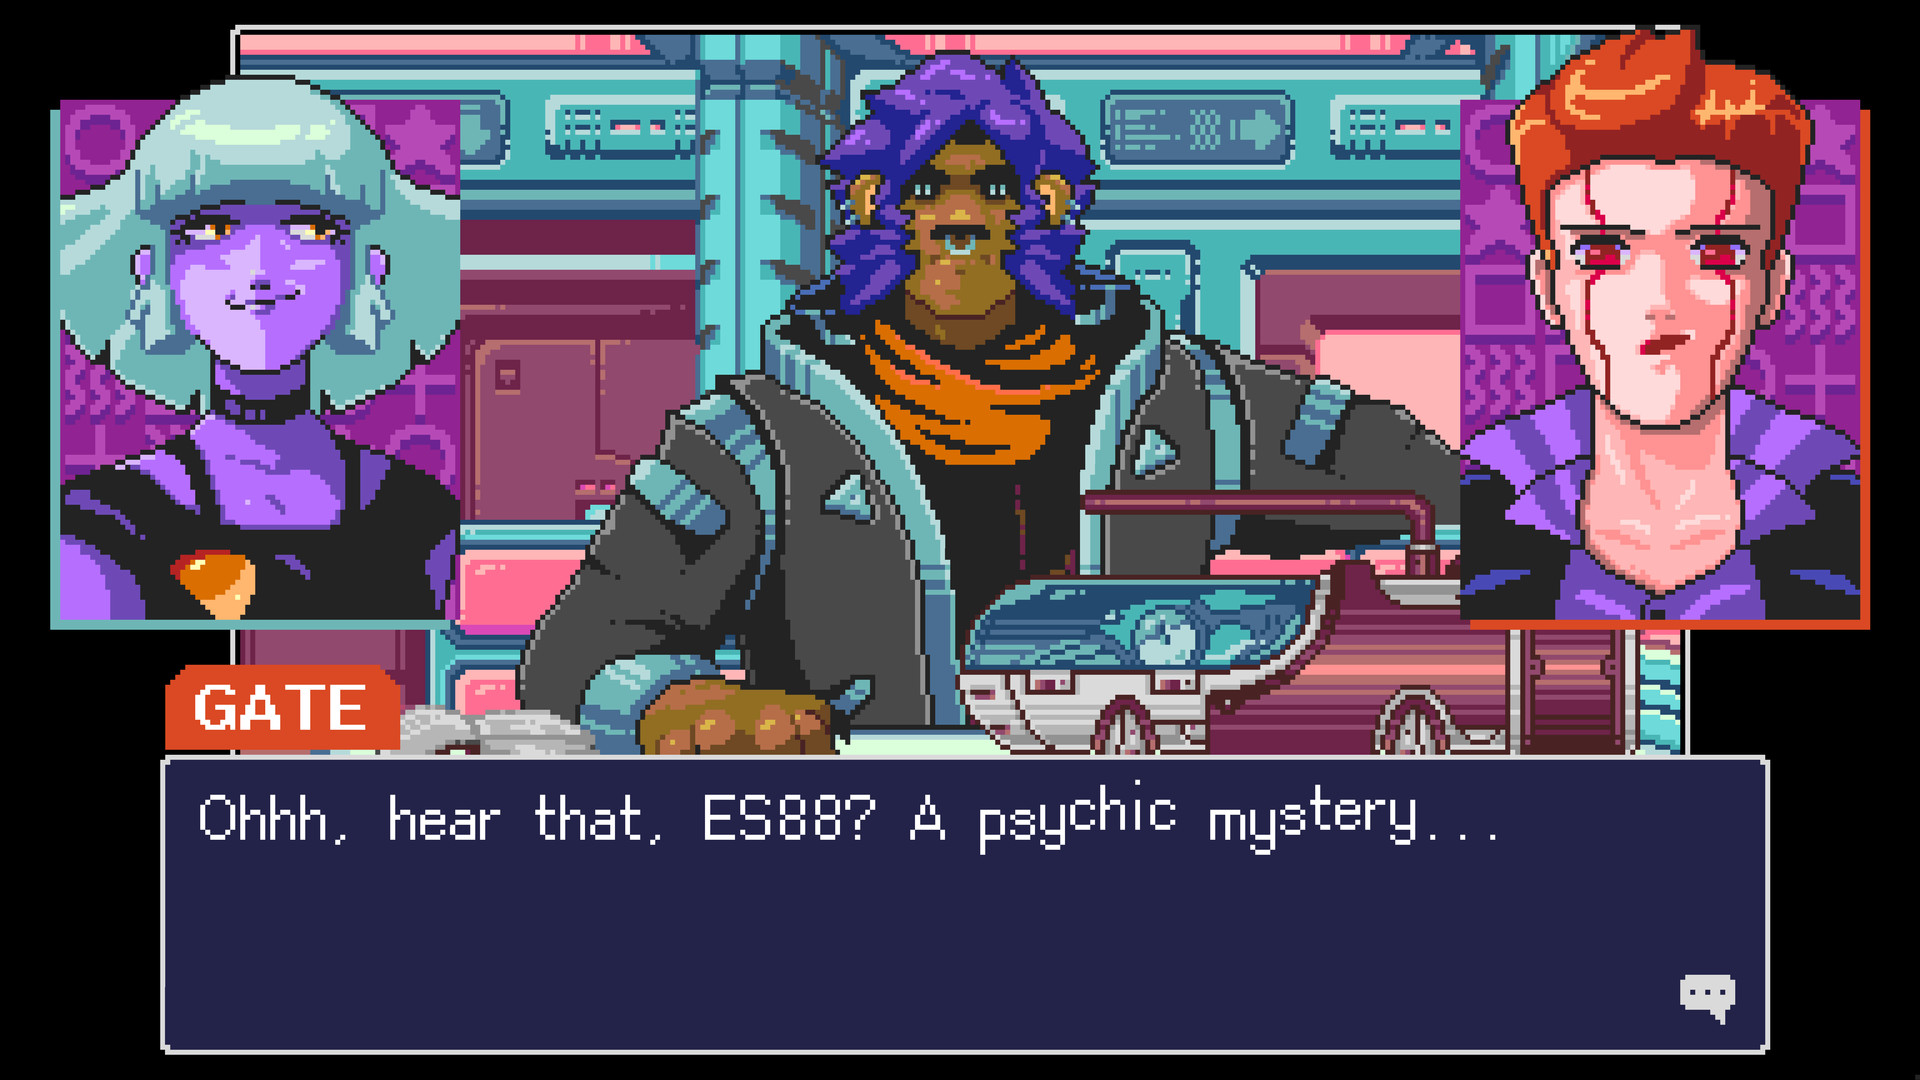 Read Only Memories: NEURODIVER launches this summer